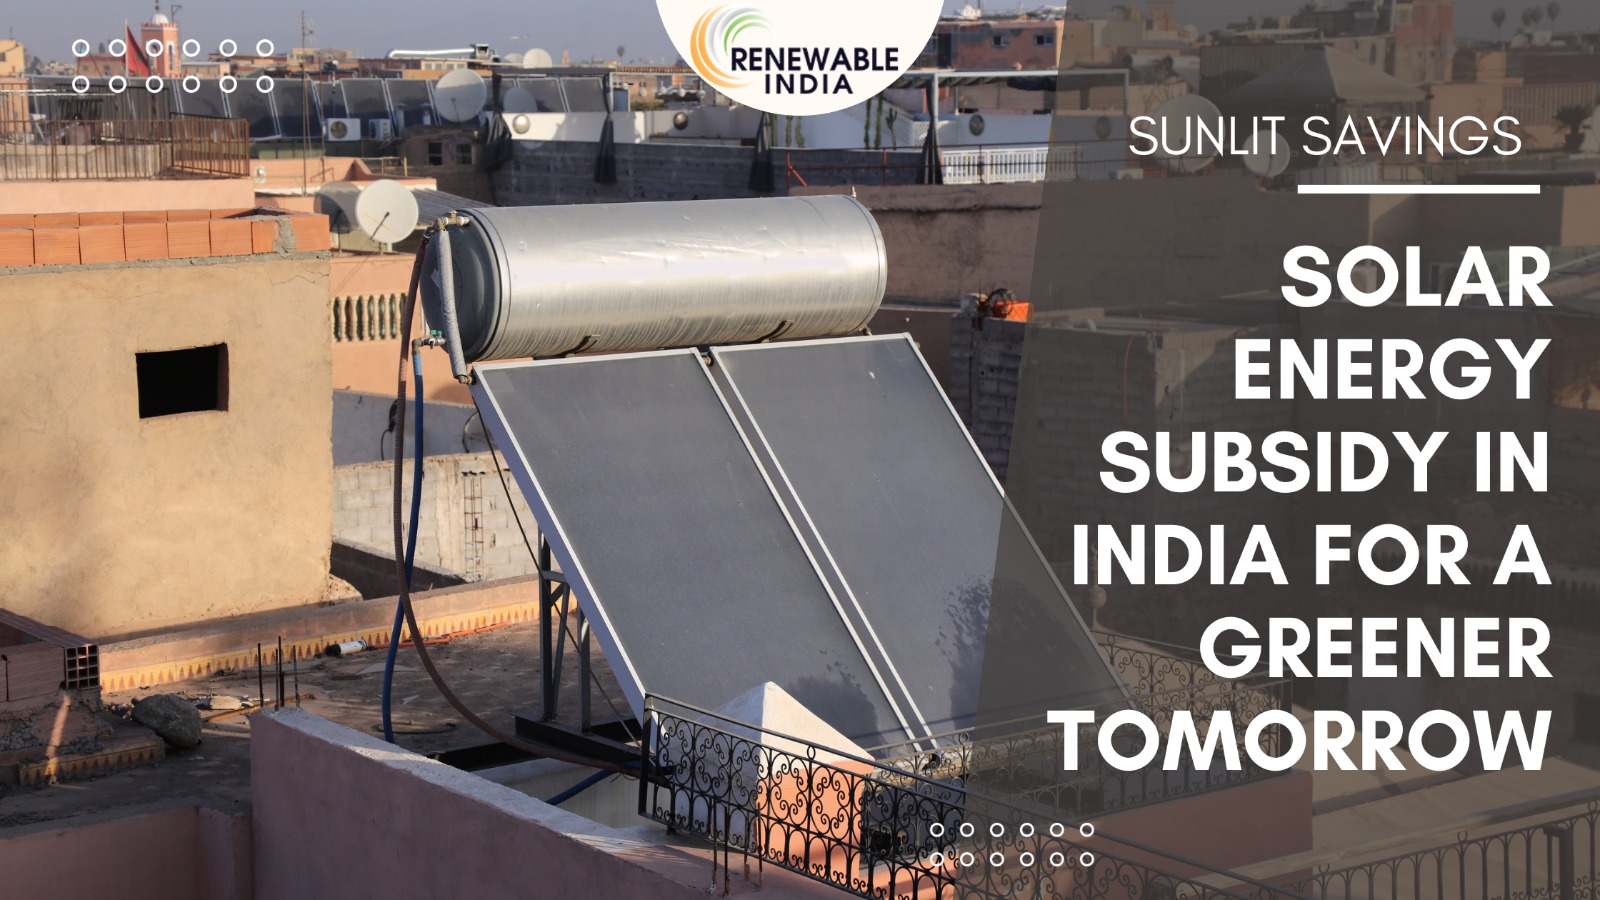 Solar Panel Subsidy in India